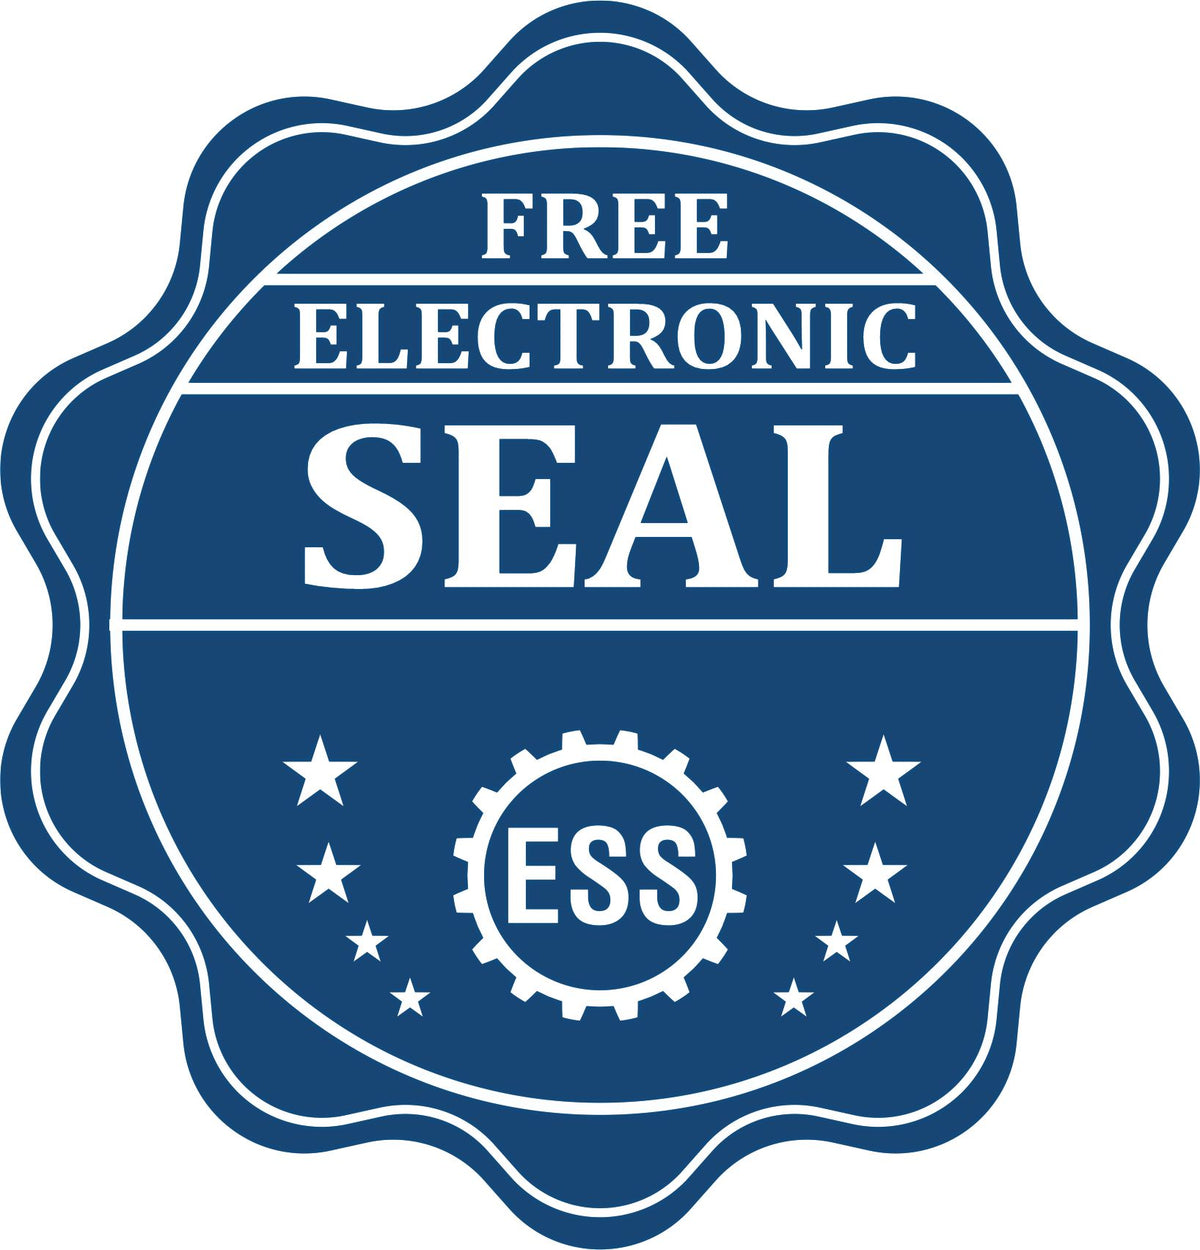 A badge showing a free electronic seal for the Handheld Texas Architect Seal Embosser with stars and the ESS gear on the emblem.